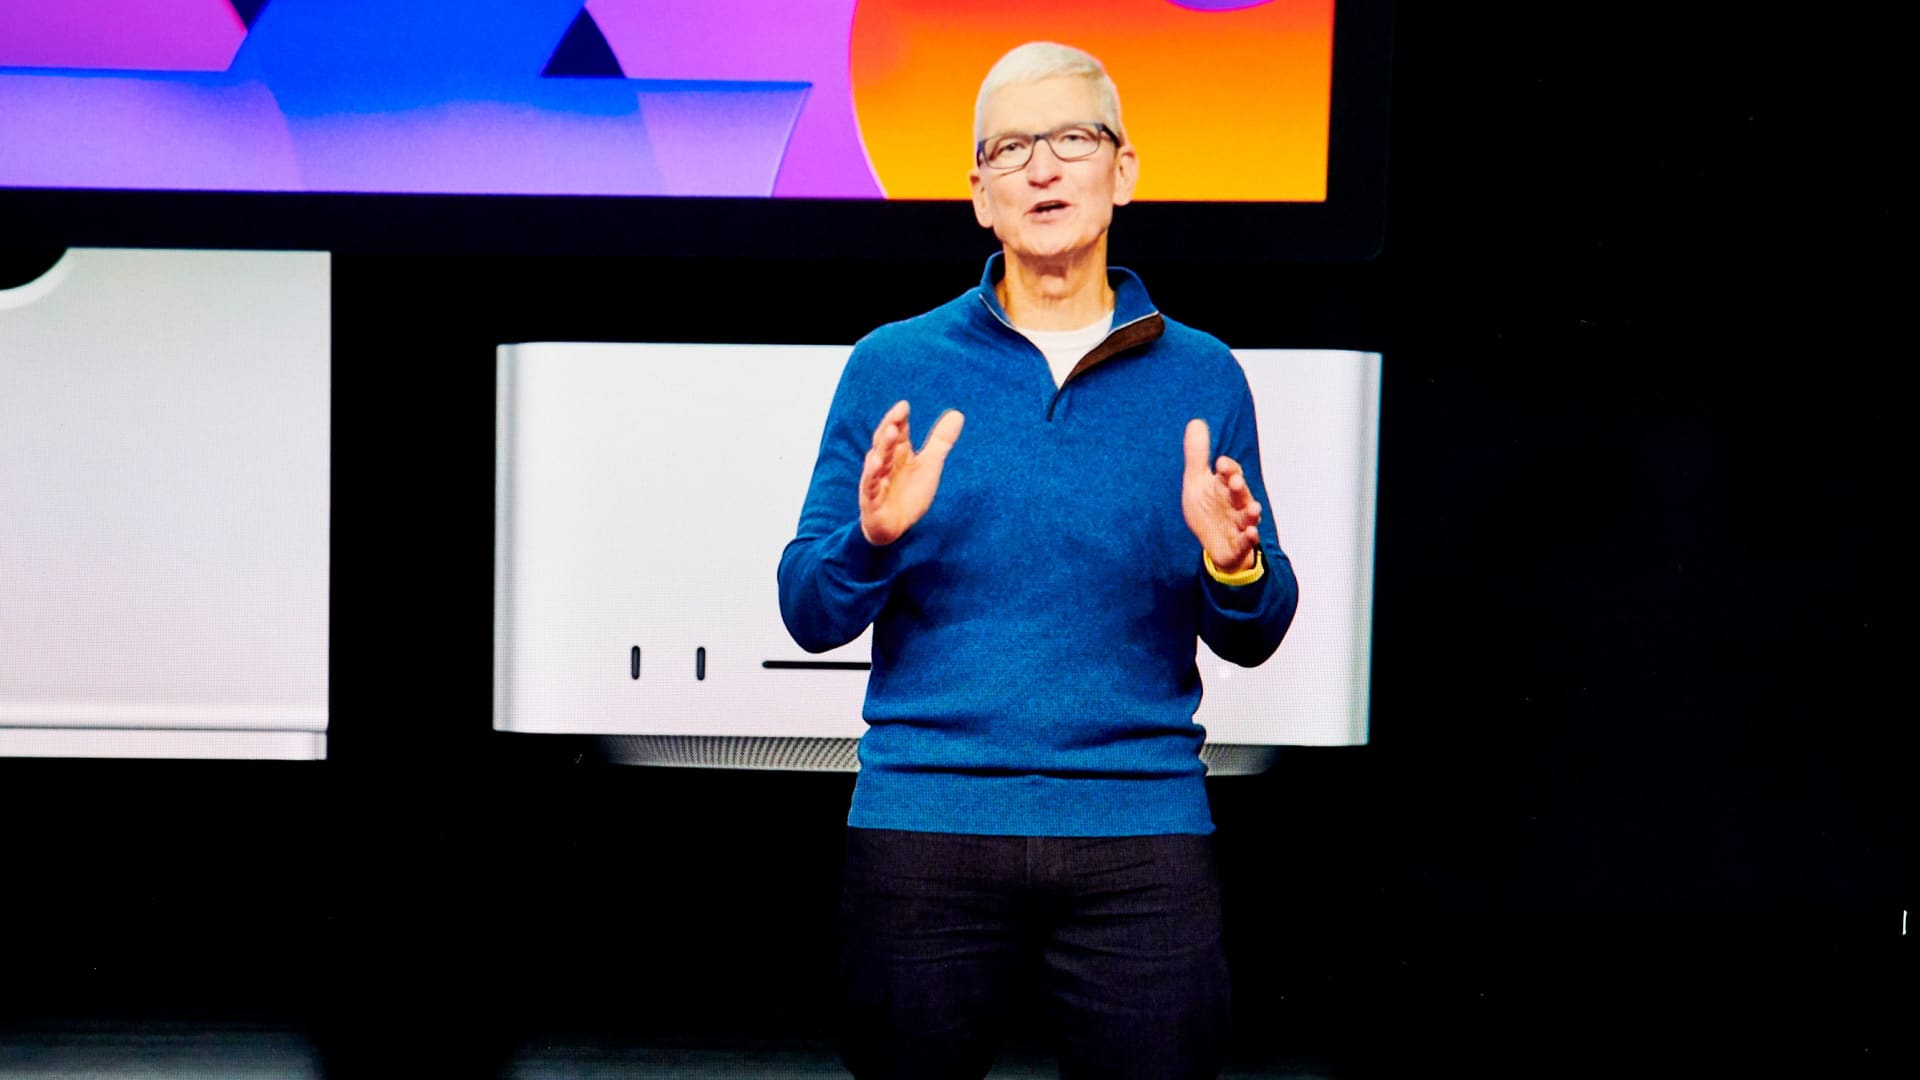 Tim Cook, chief executive officer of Apple Inc., speaks during the Peek Performance virtual event in New York, U.S., on Tuesday, March 8, 2022.